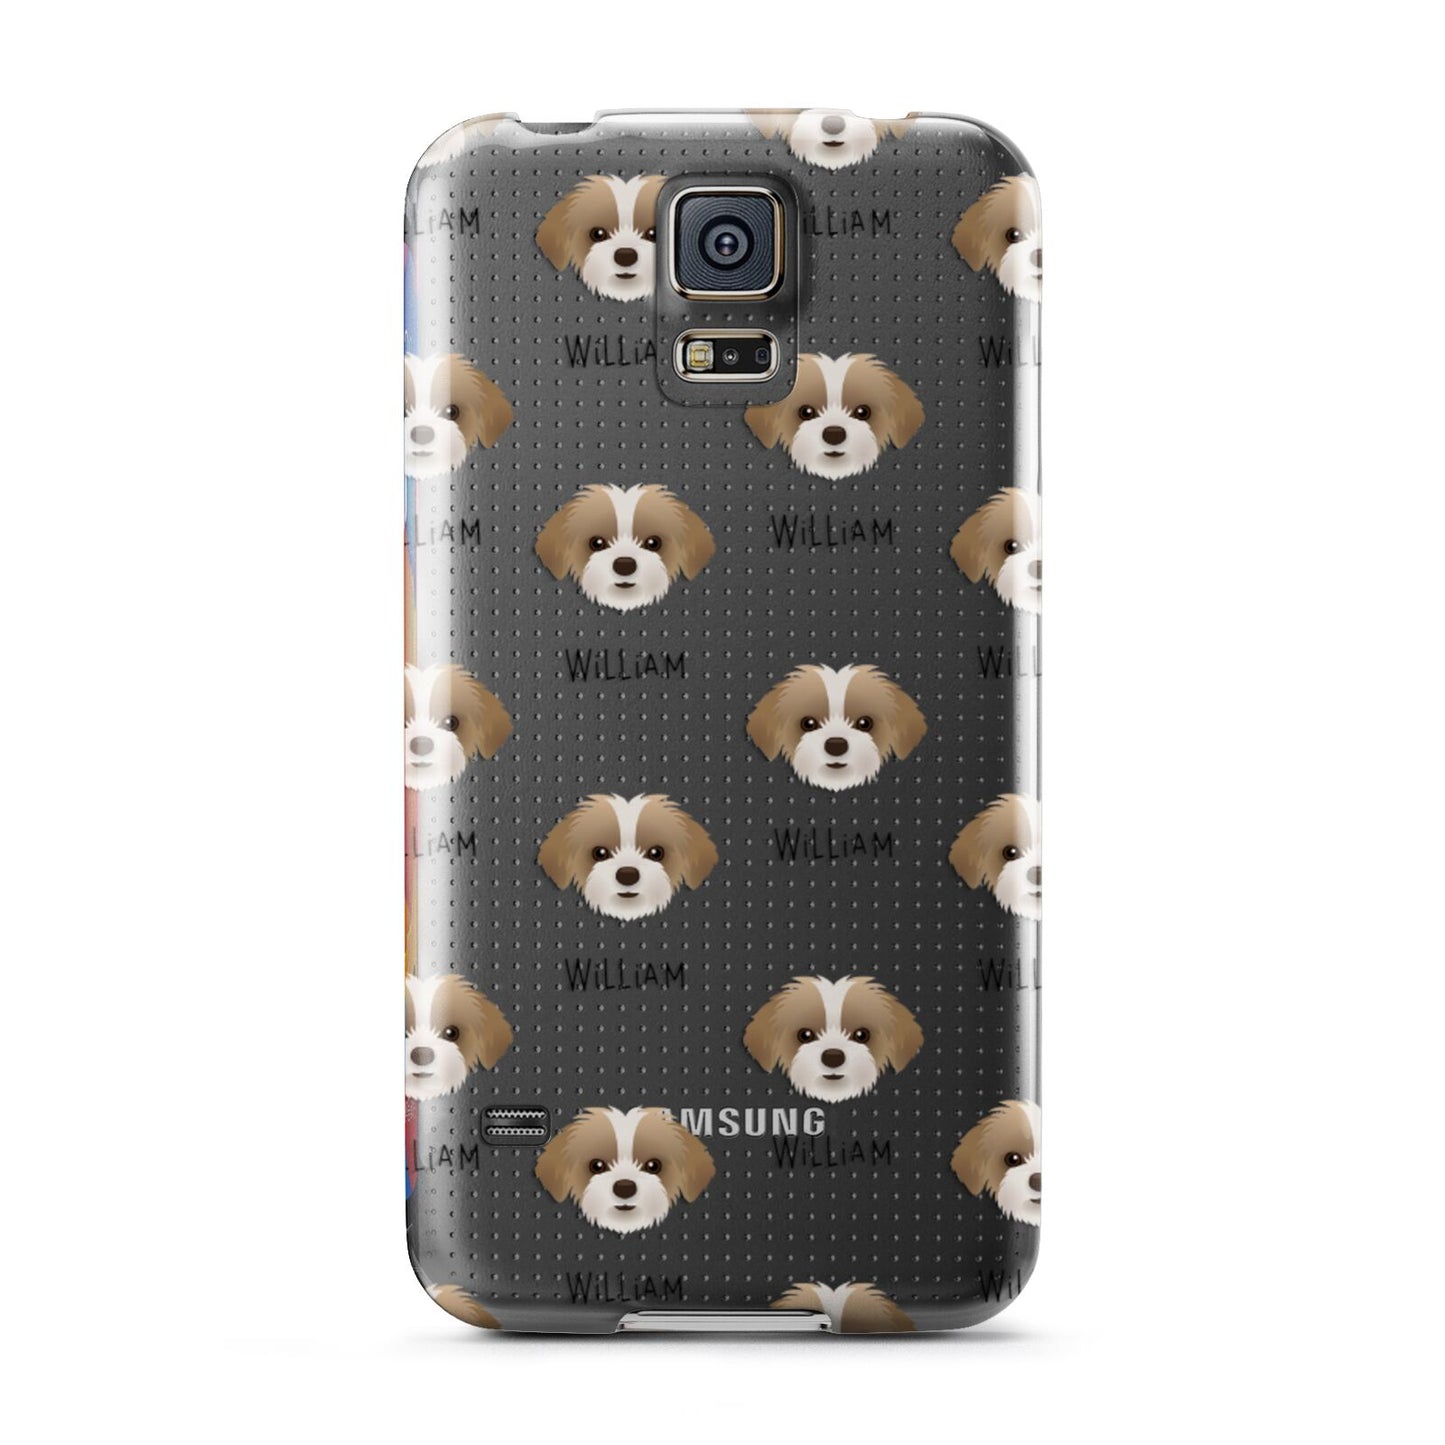 Shorkie Icon with Name Samsung Galaxy S5 Case